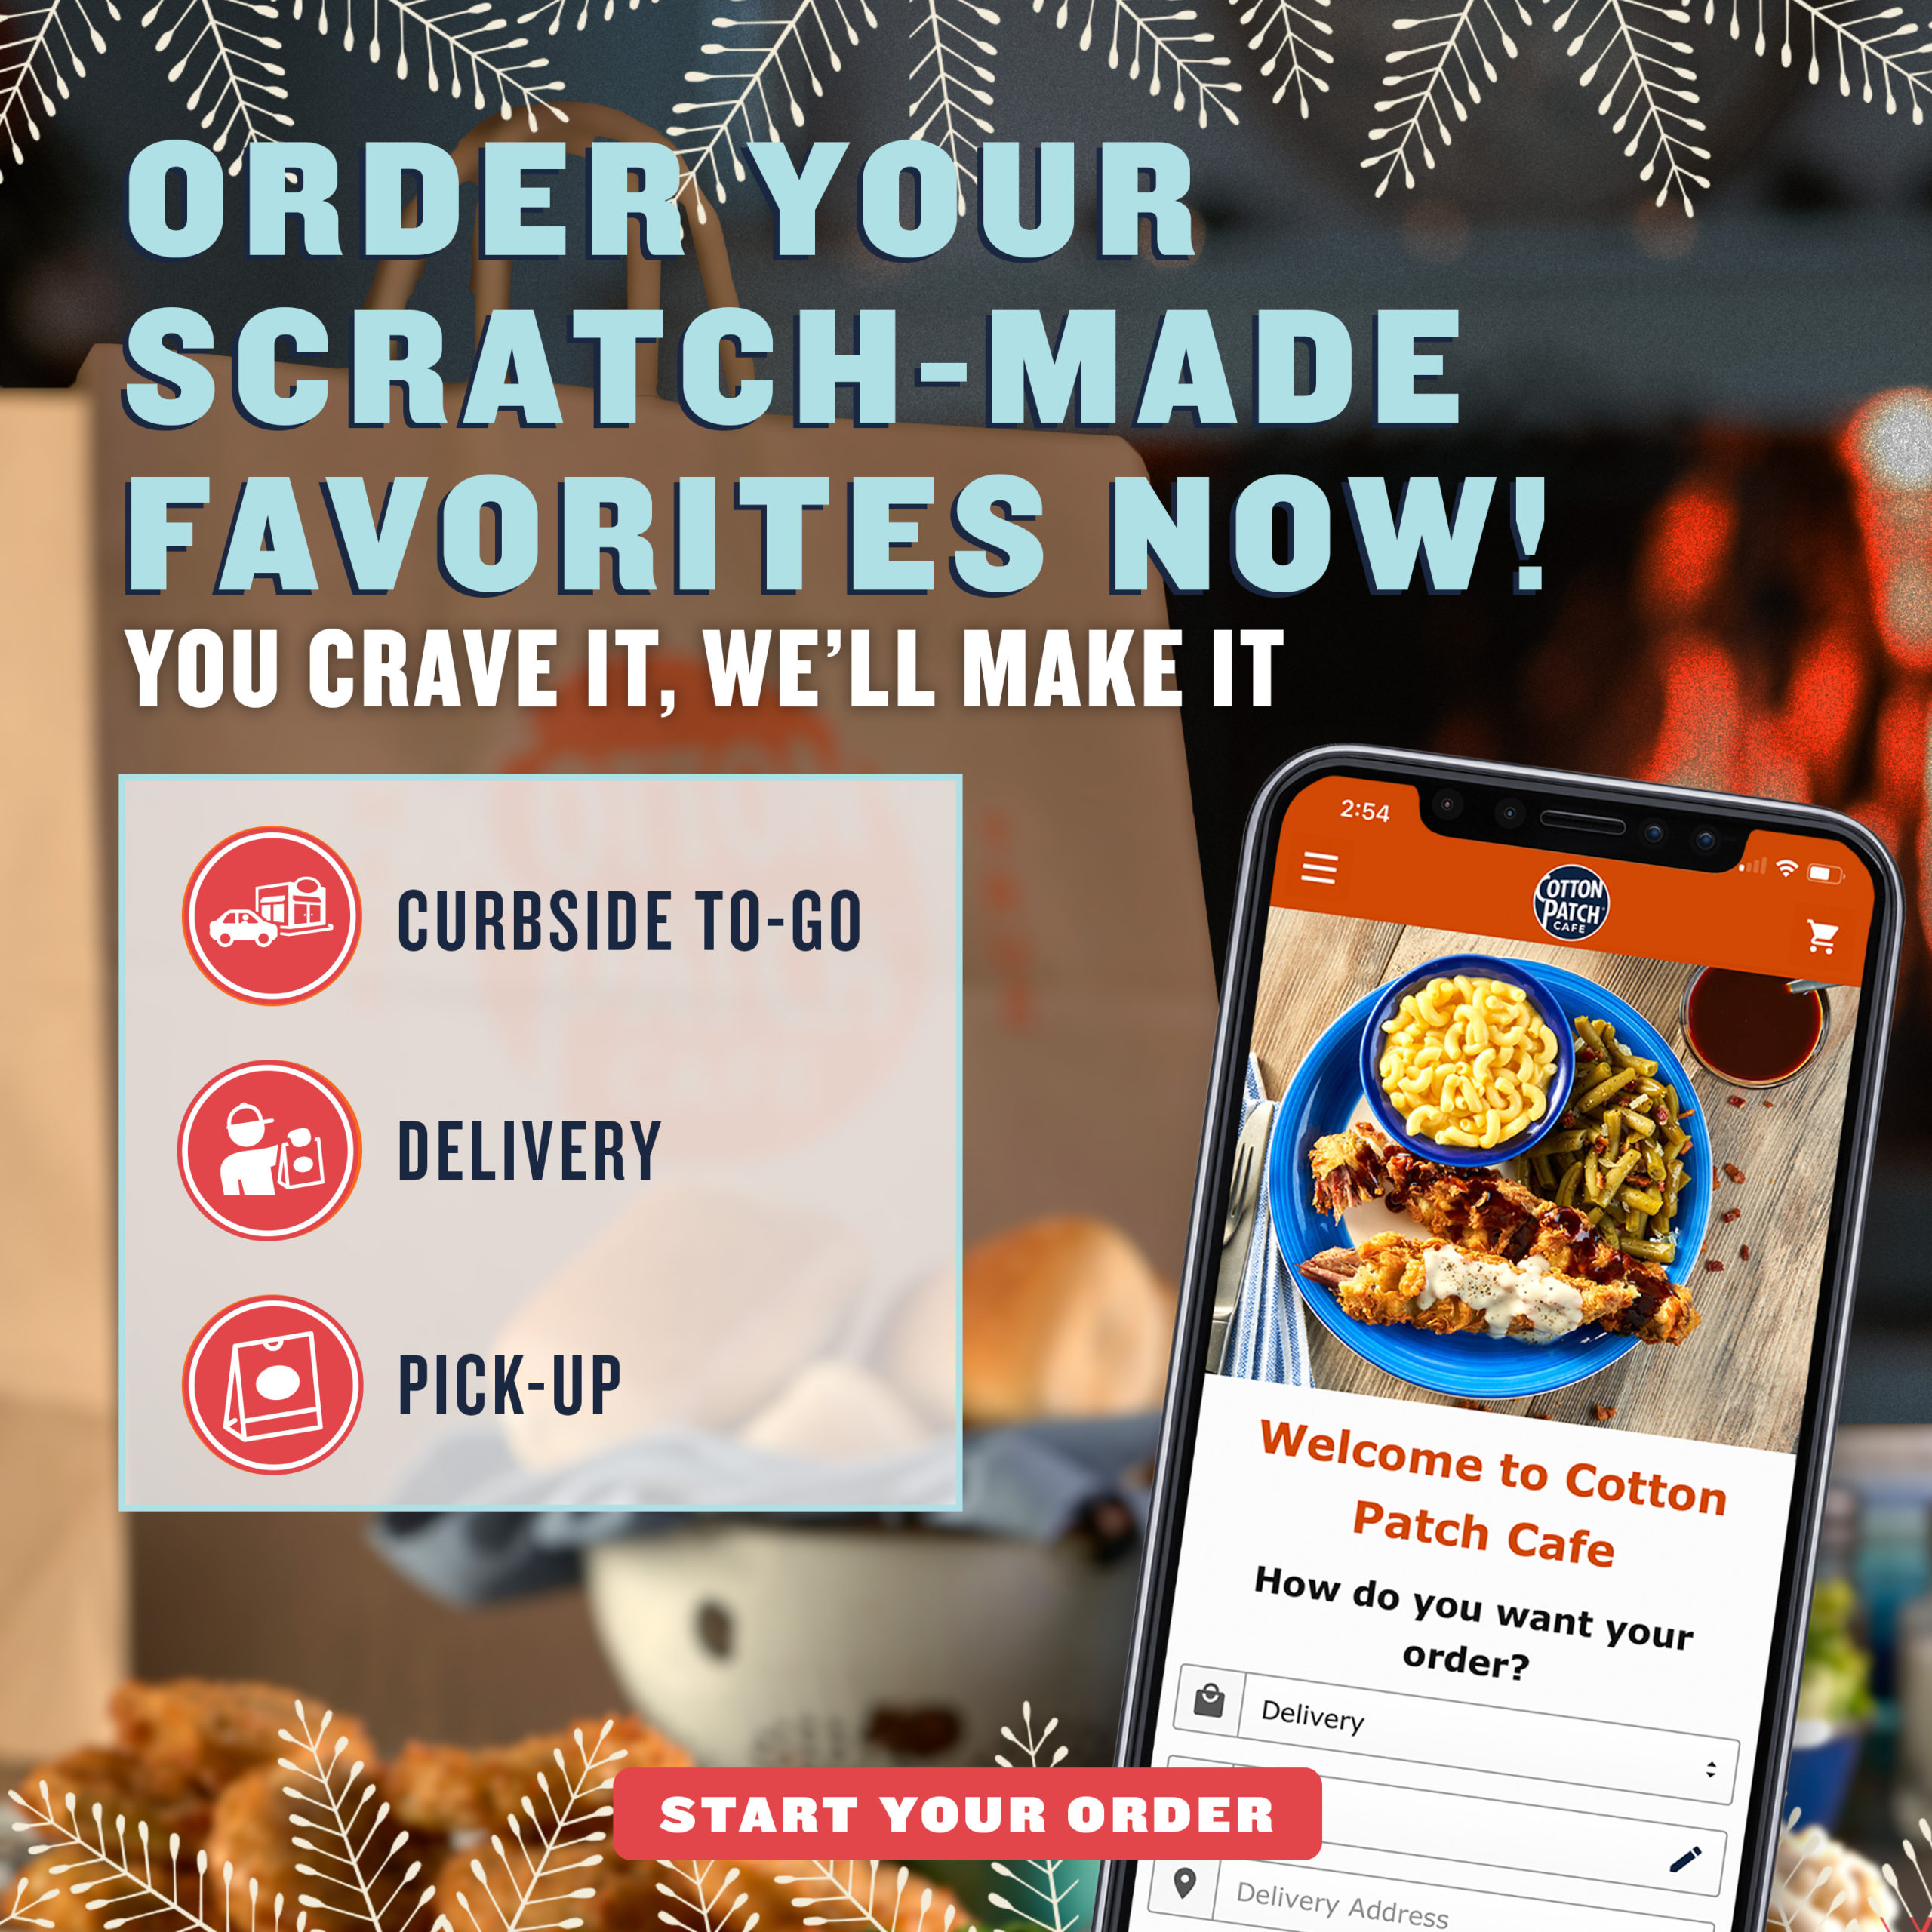 Order your scratch-made favorites now for delivery! You crave it, we'll make it